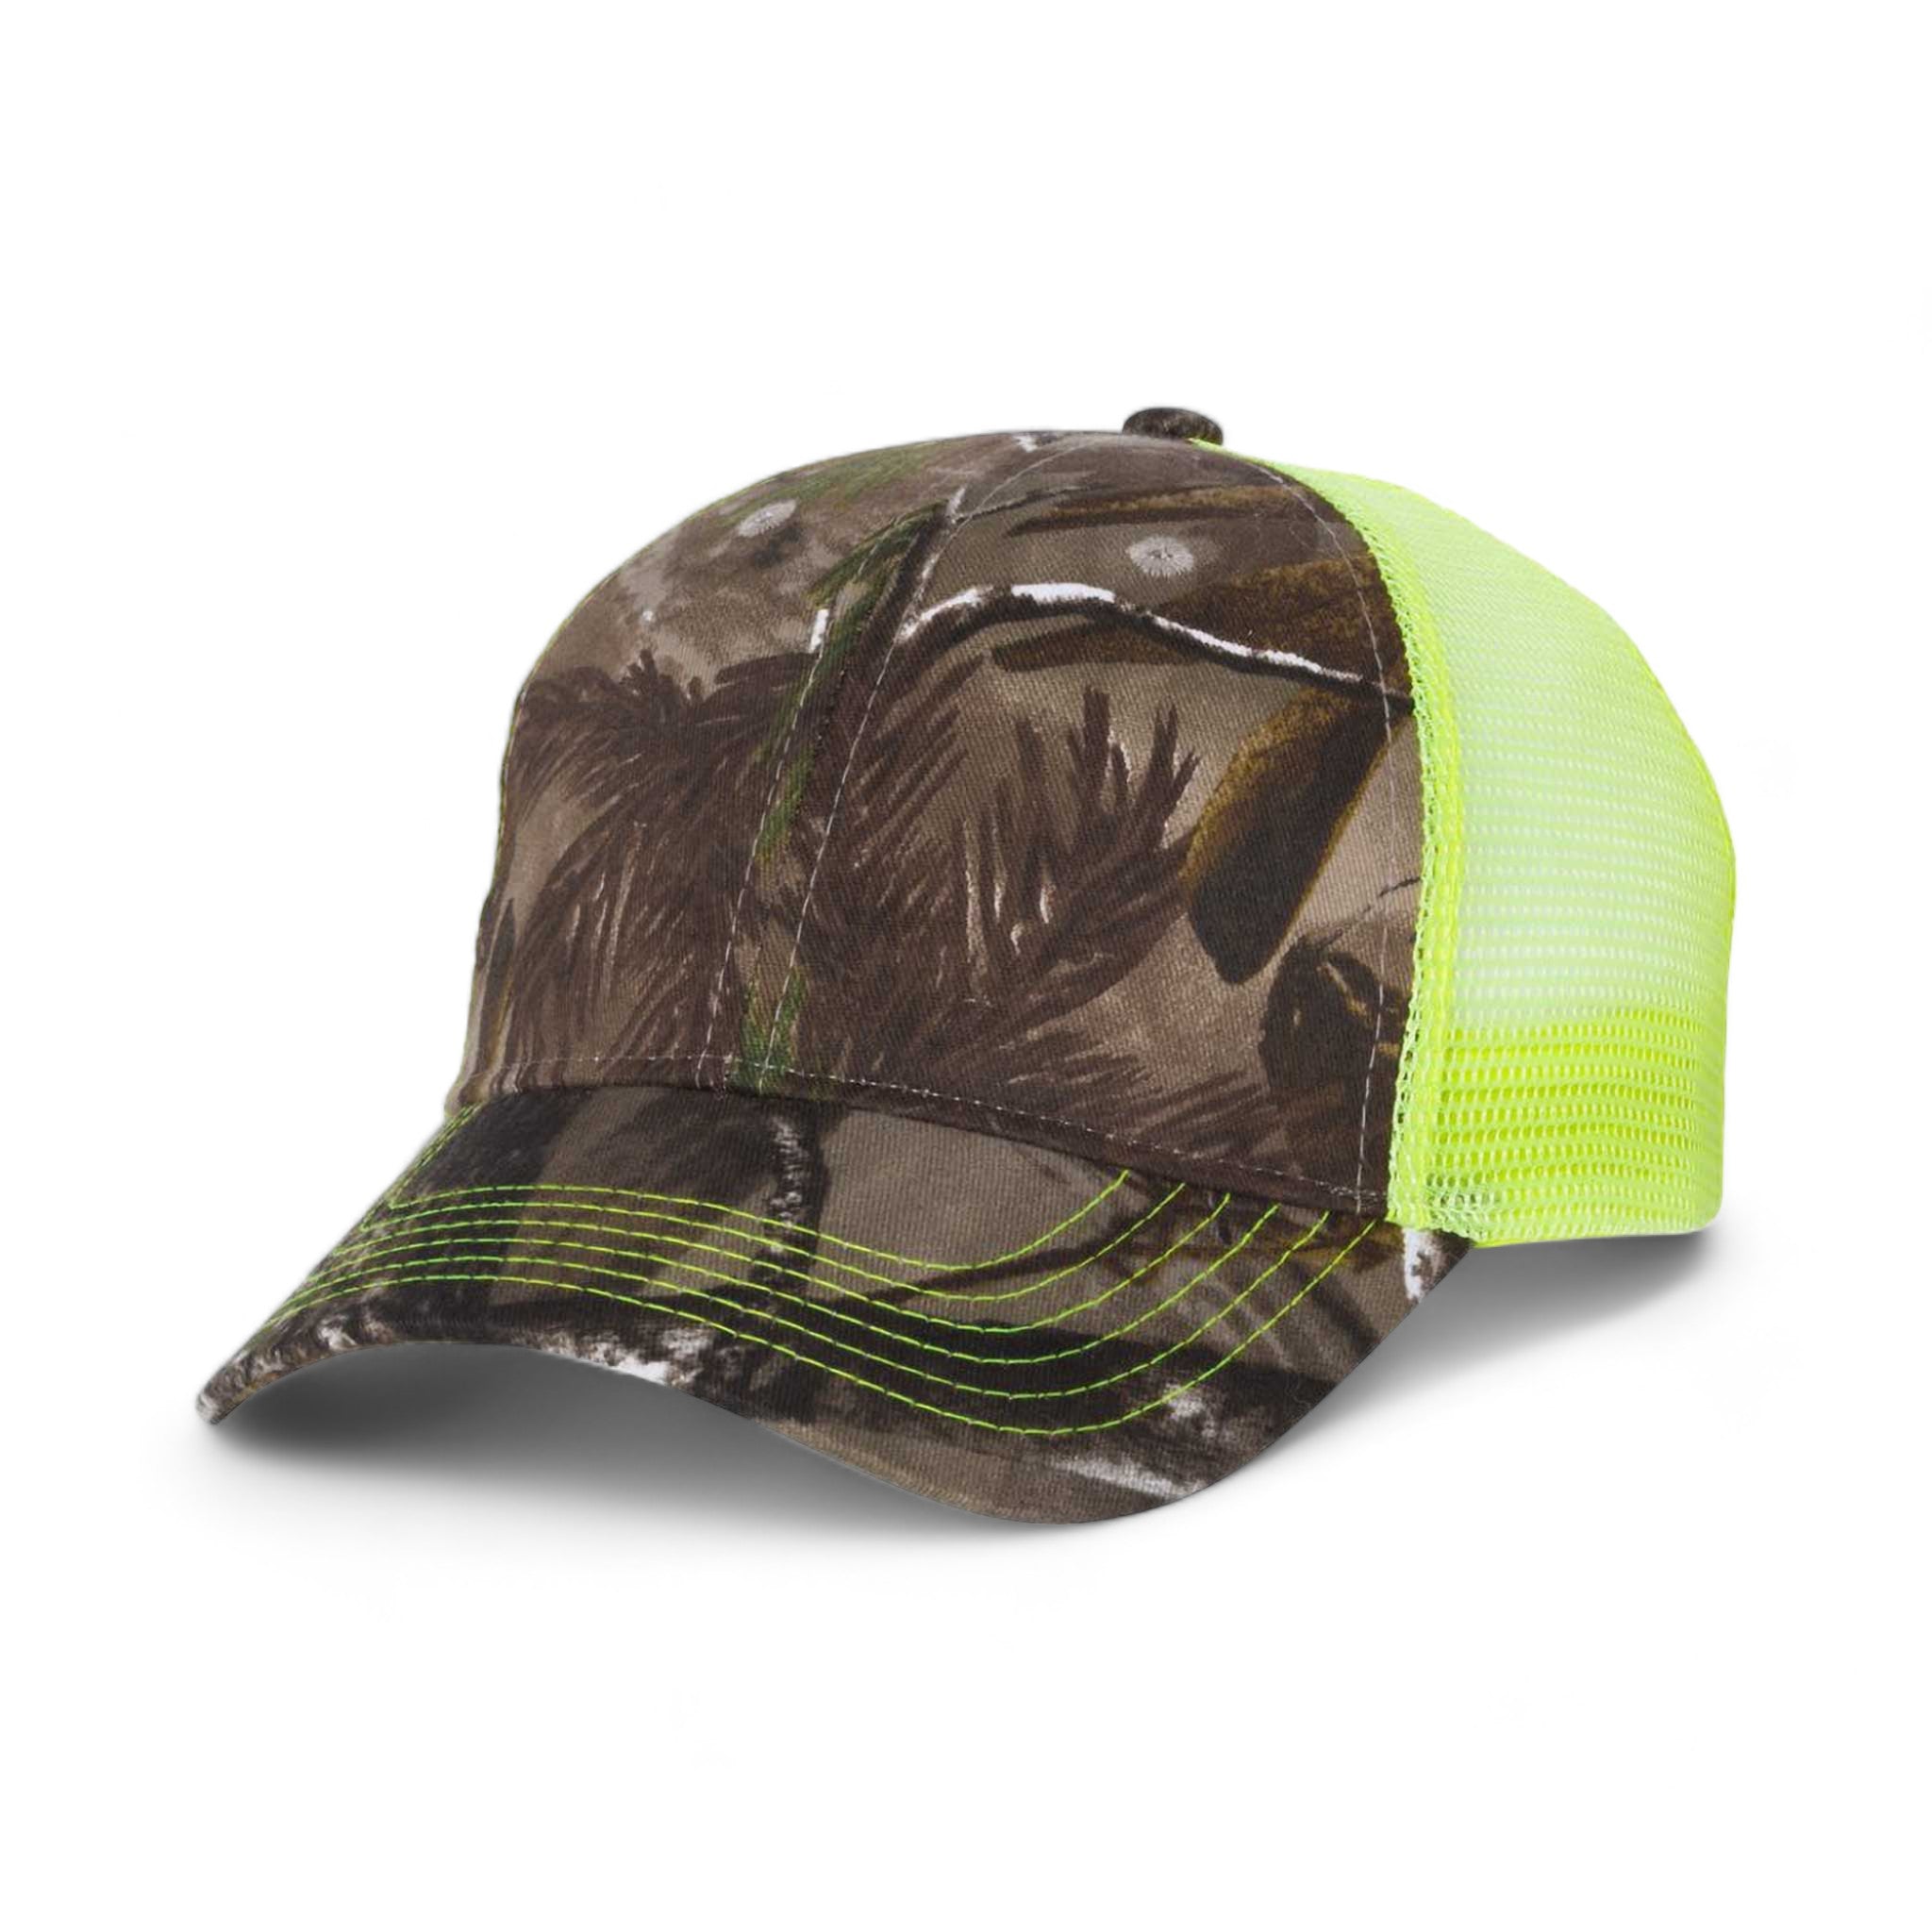 Side view of Kati LC5M custom hat in realtree ap and neon yellow